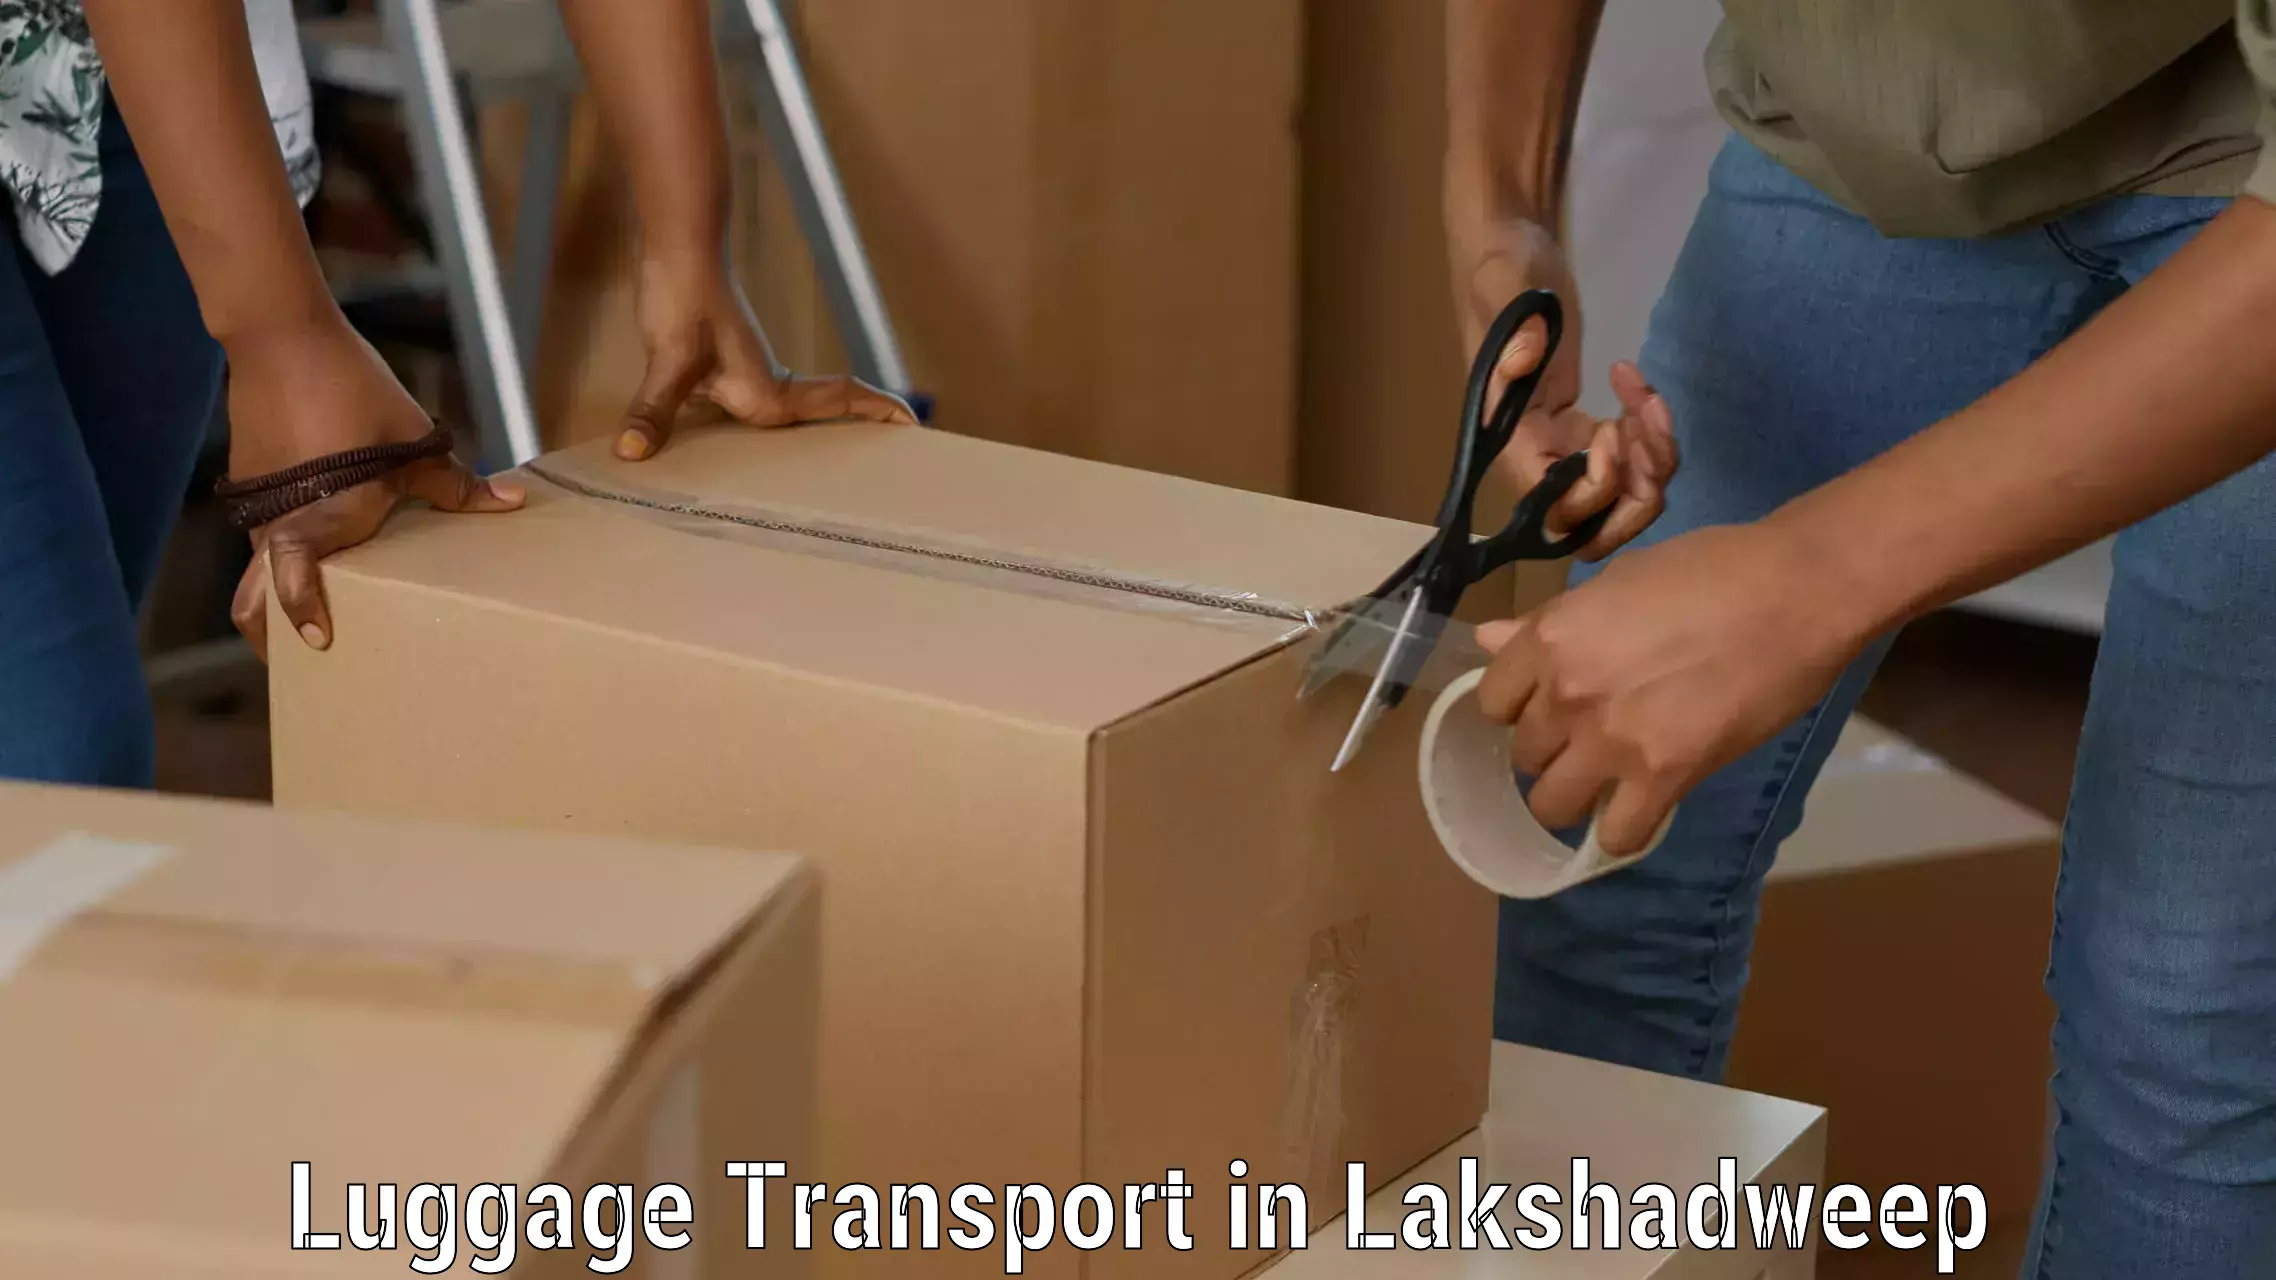 Baggage courier operations in Lakshadweep